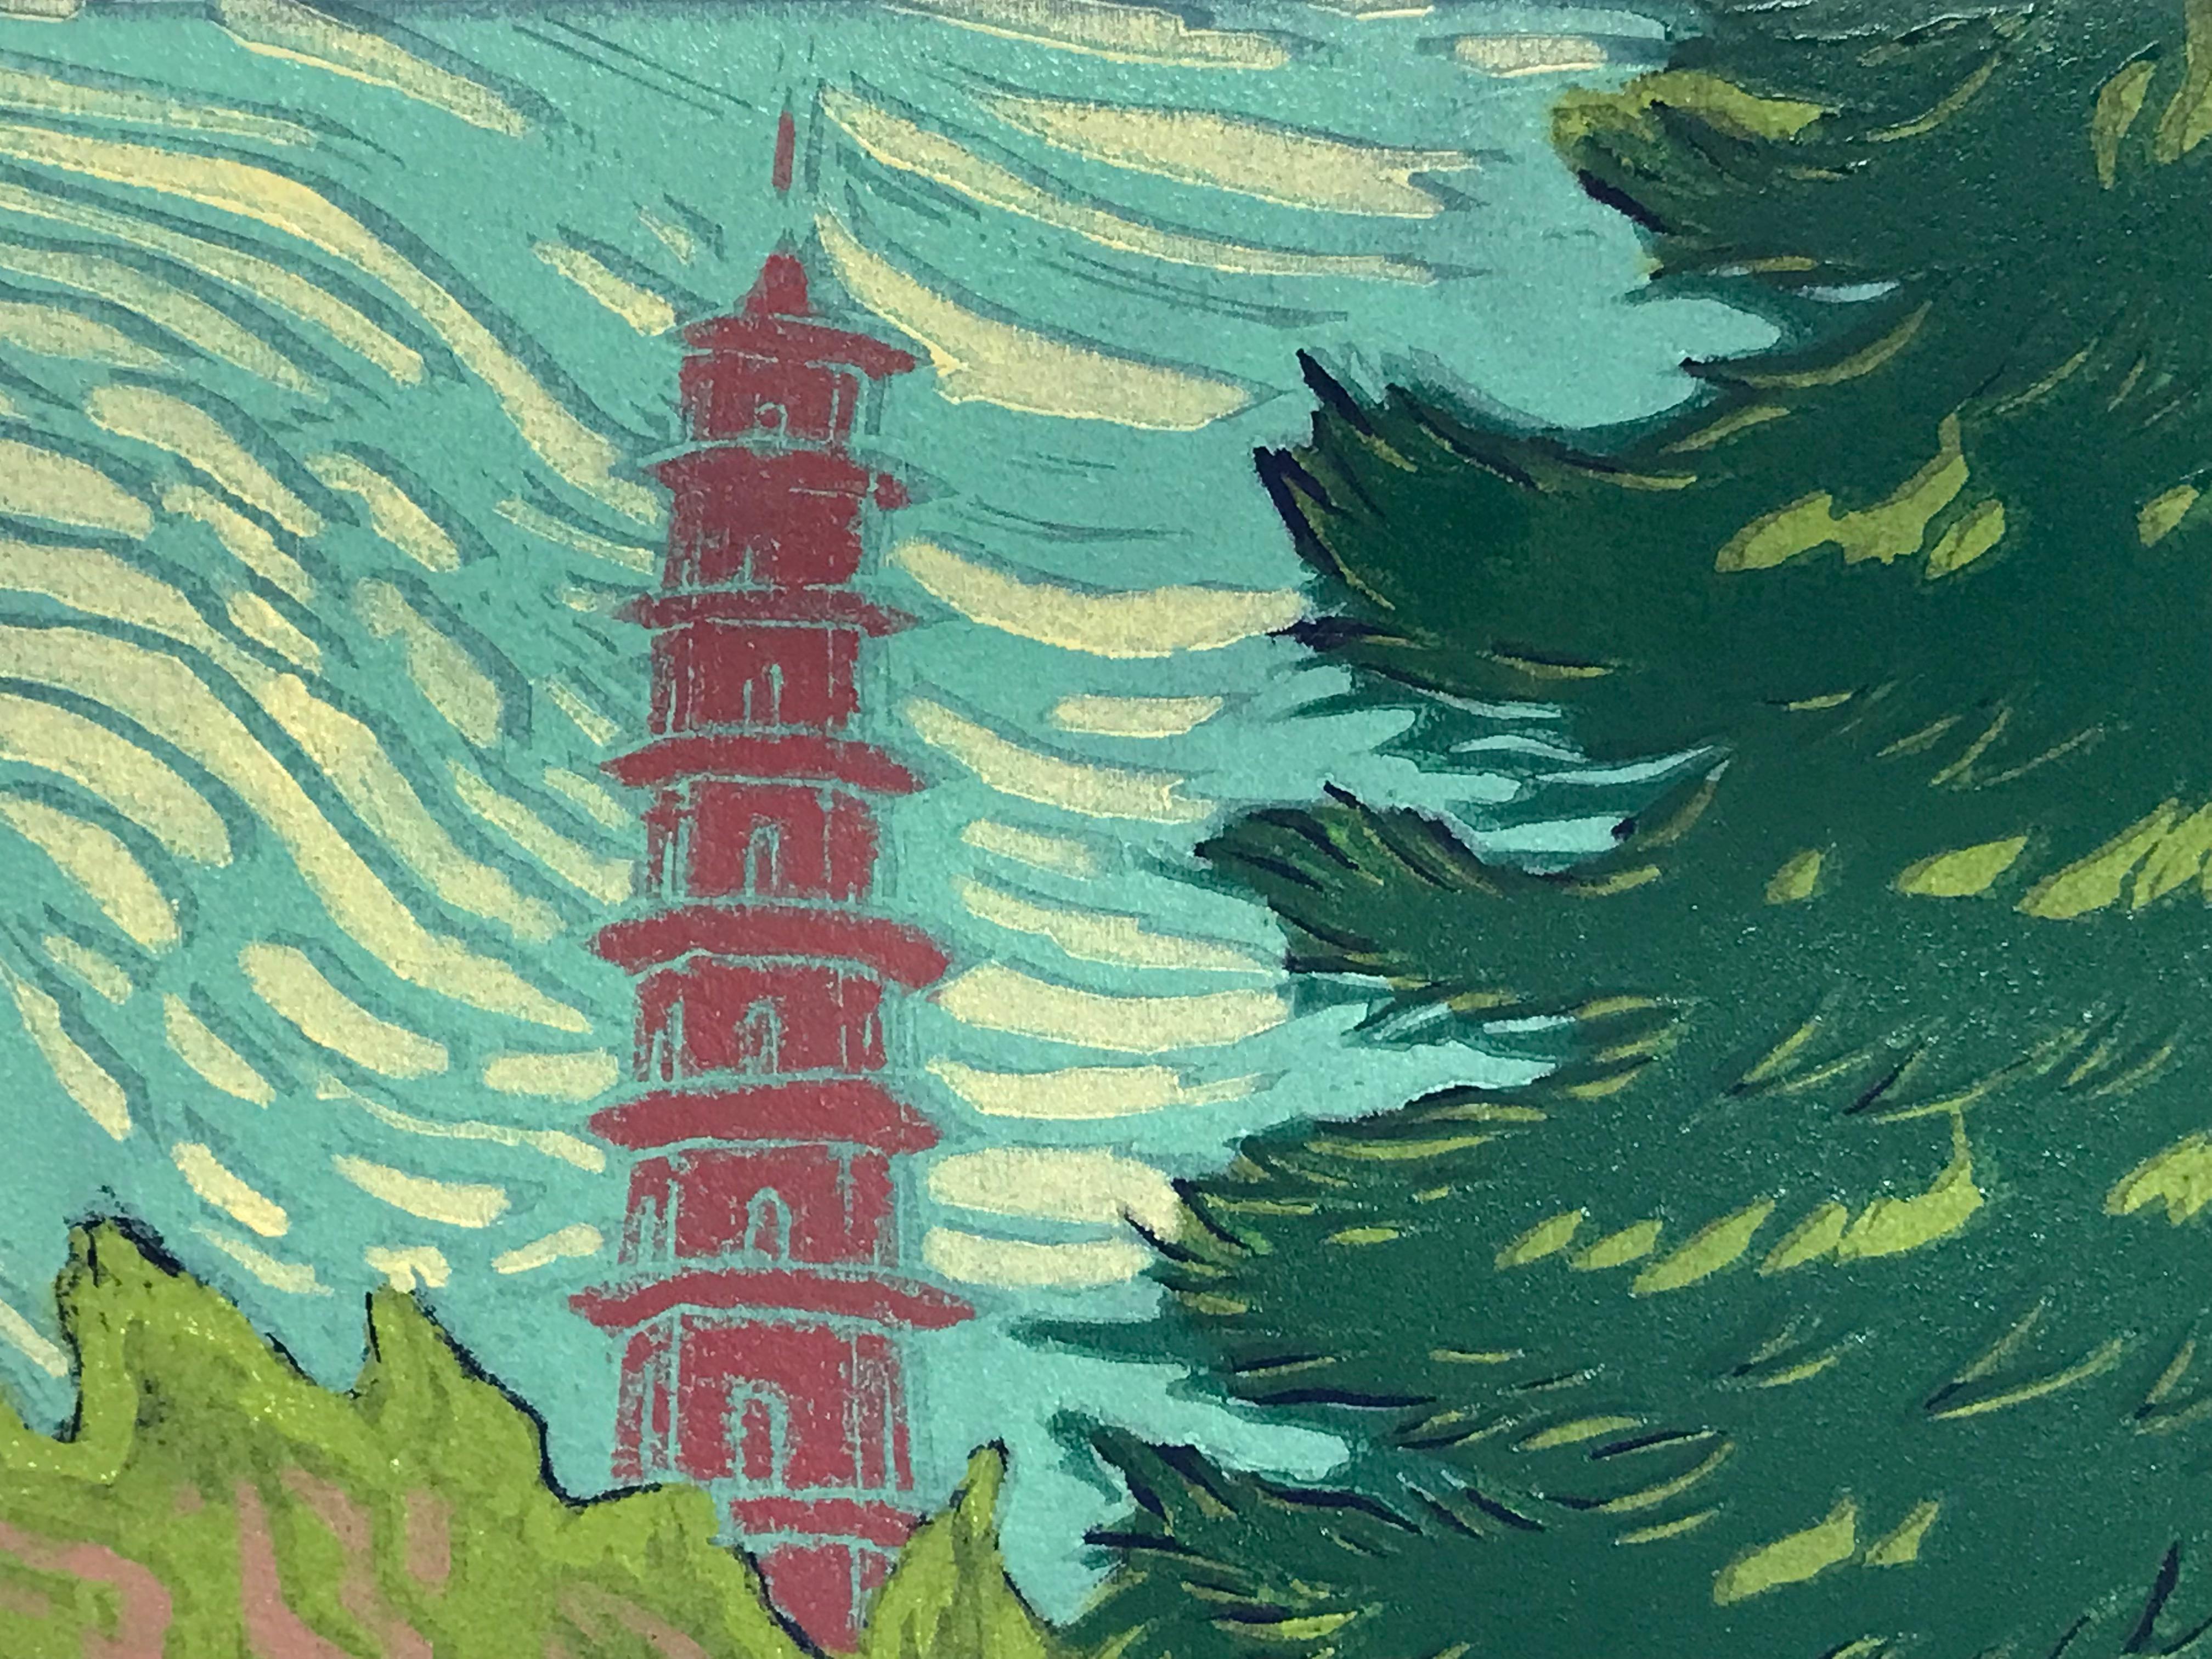 A limited edition woodcut on paper print by Mychael Barratt of Vincent Van Gogh with a lady on a walk in london, passing a grand tree and Great Pagoda. The print is compromised of blue, green, purple, pink and yellow tones

Additional